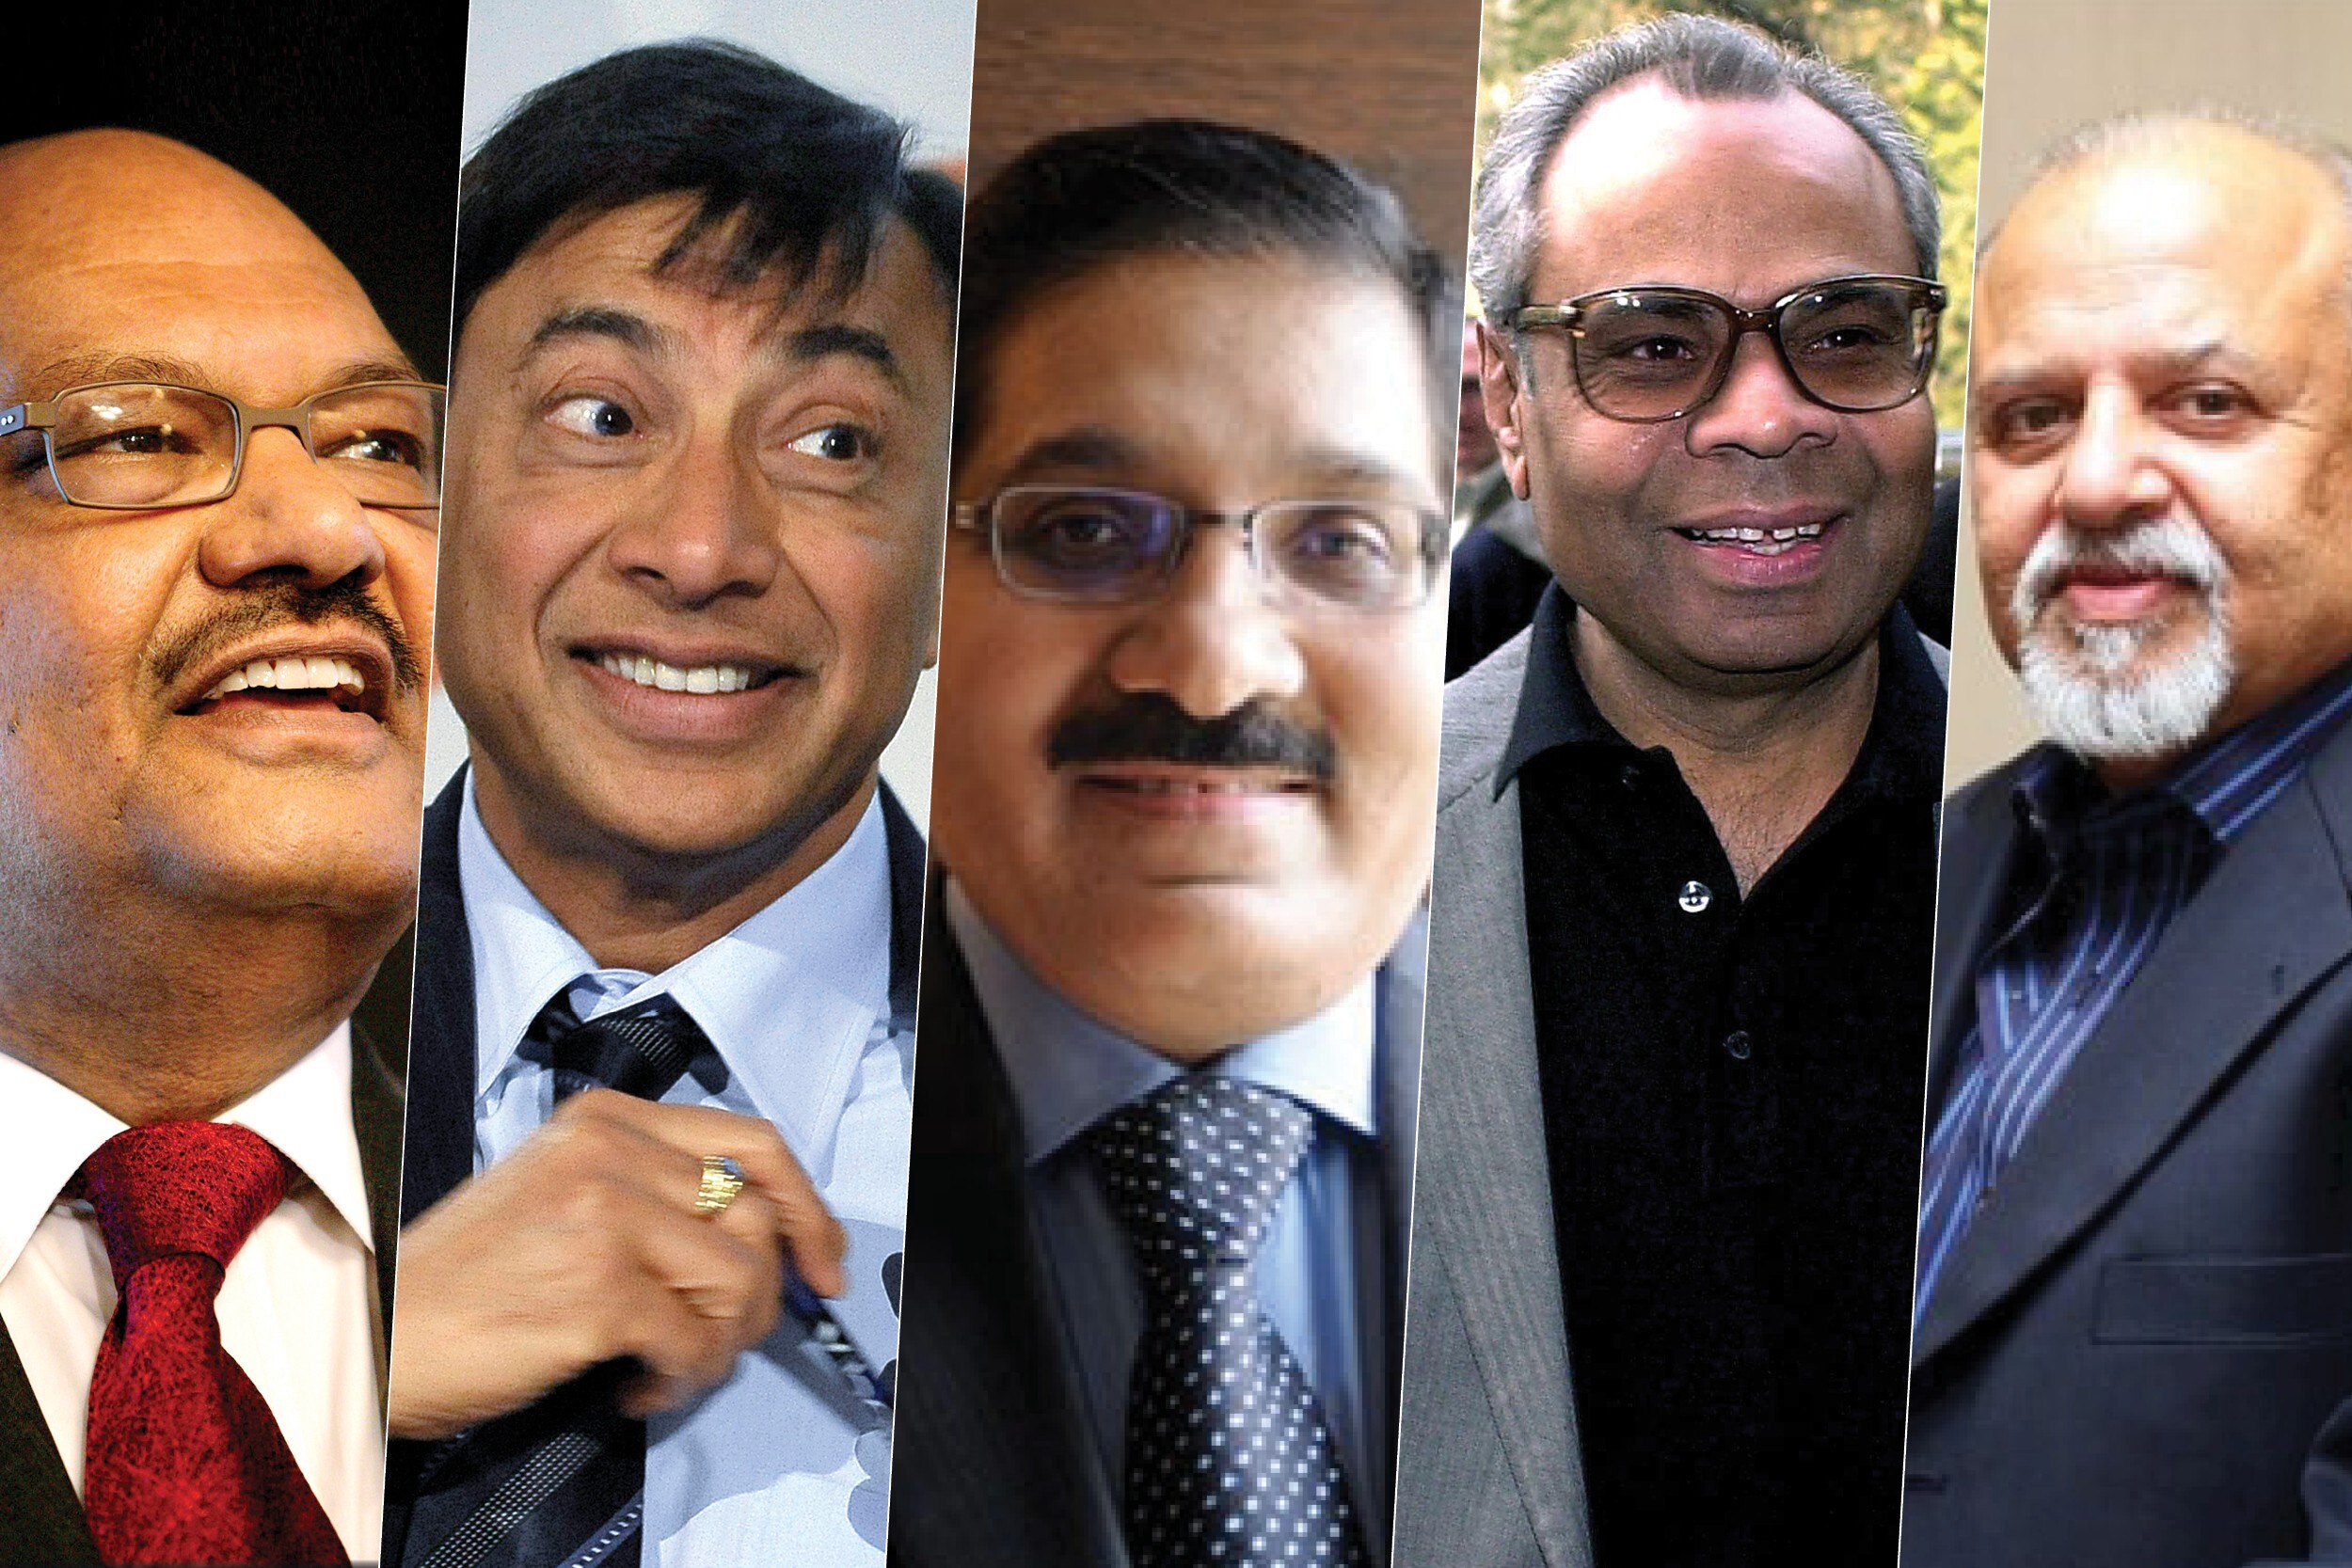 India’s top billionaires who took up residence abroad to grow their wealth. Photo: SCMP collage/Instagram